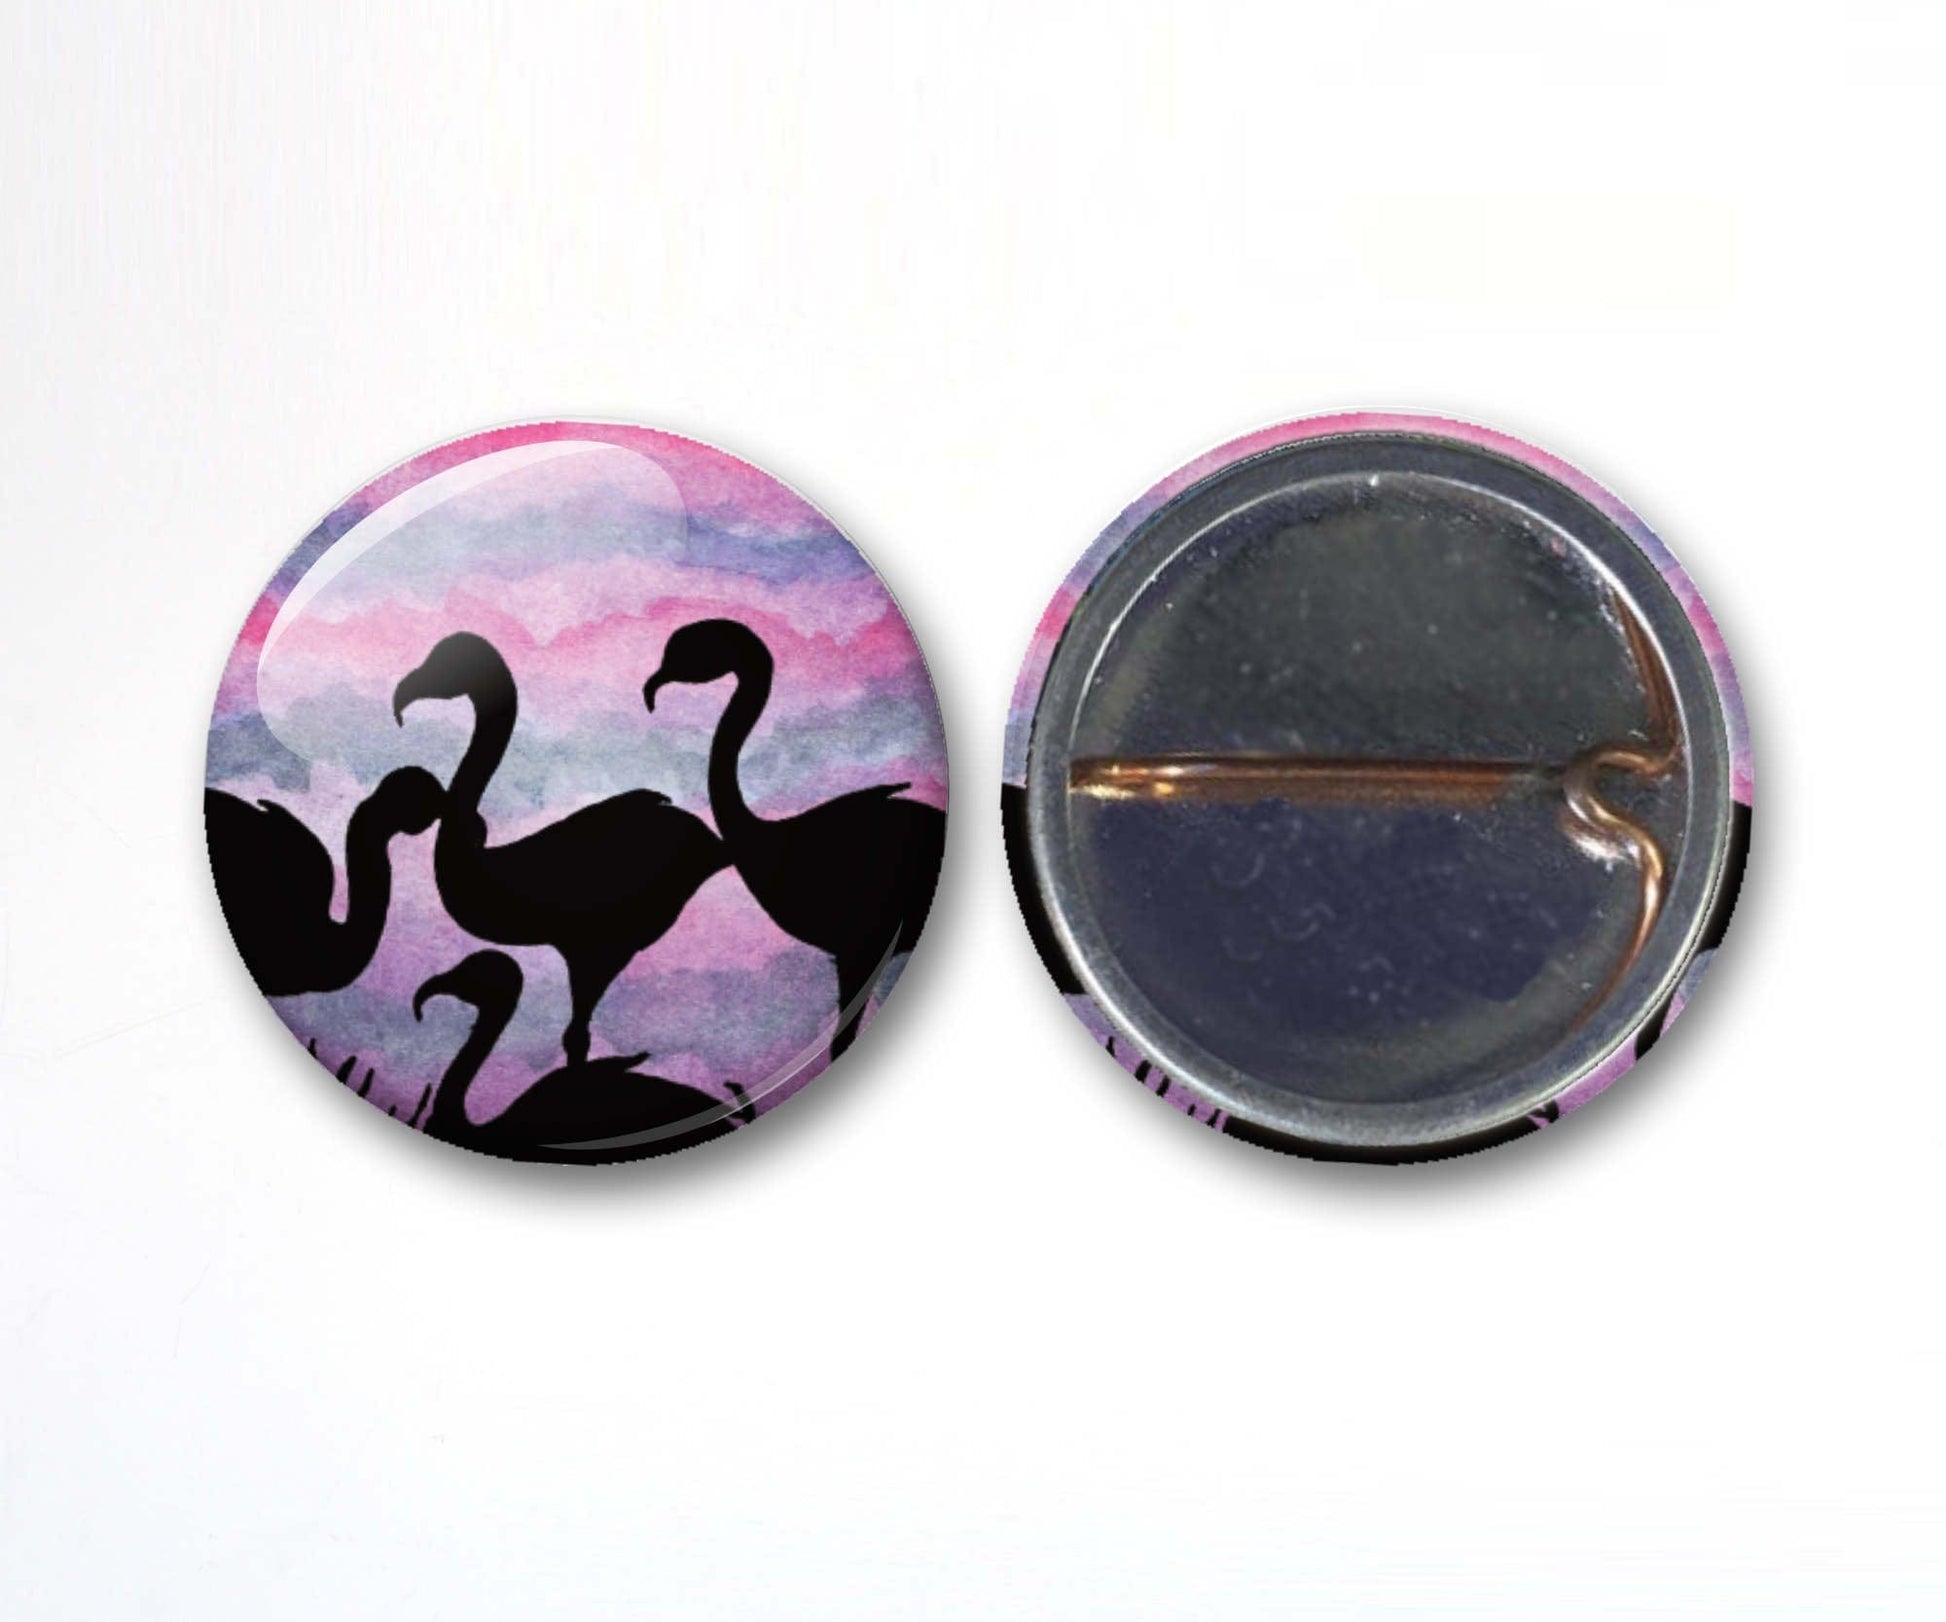 PinkPolish Design Buttons "Birds" Button Pack - 3-Pack Pin Back Button, 1 Inch